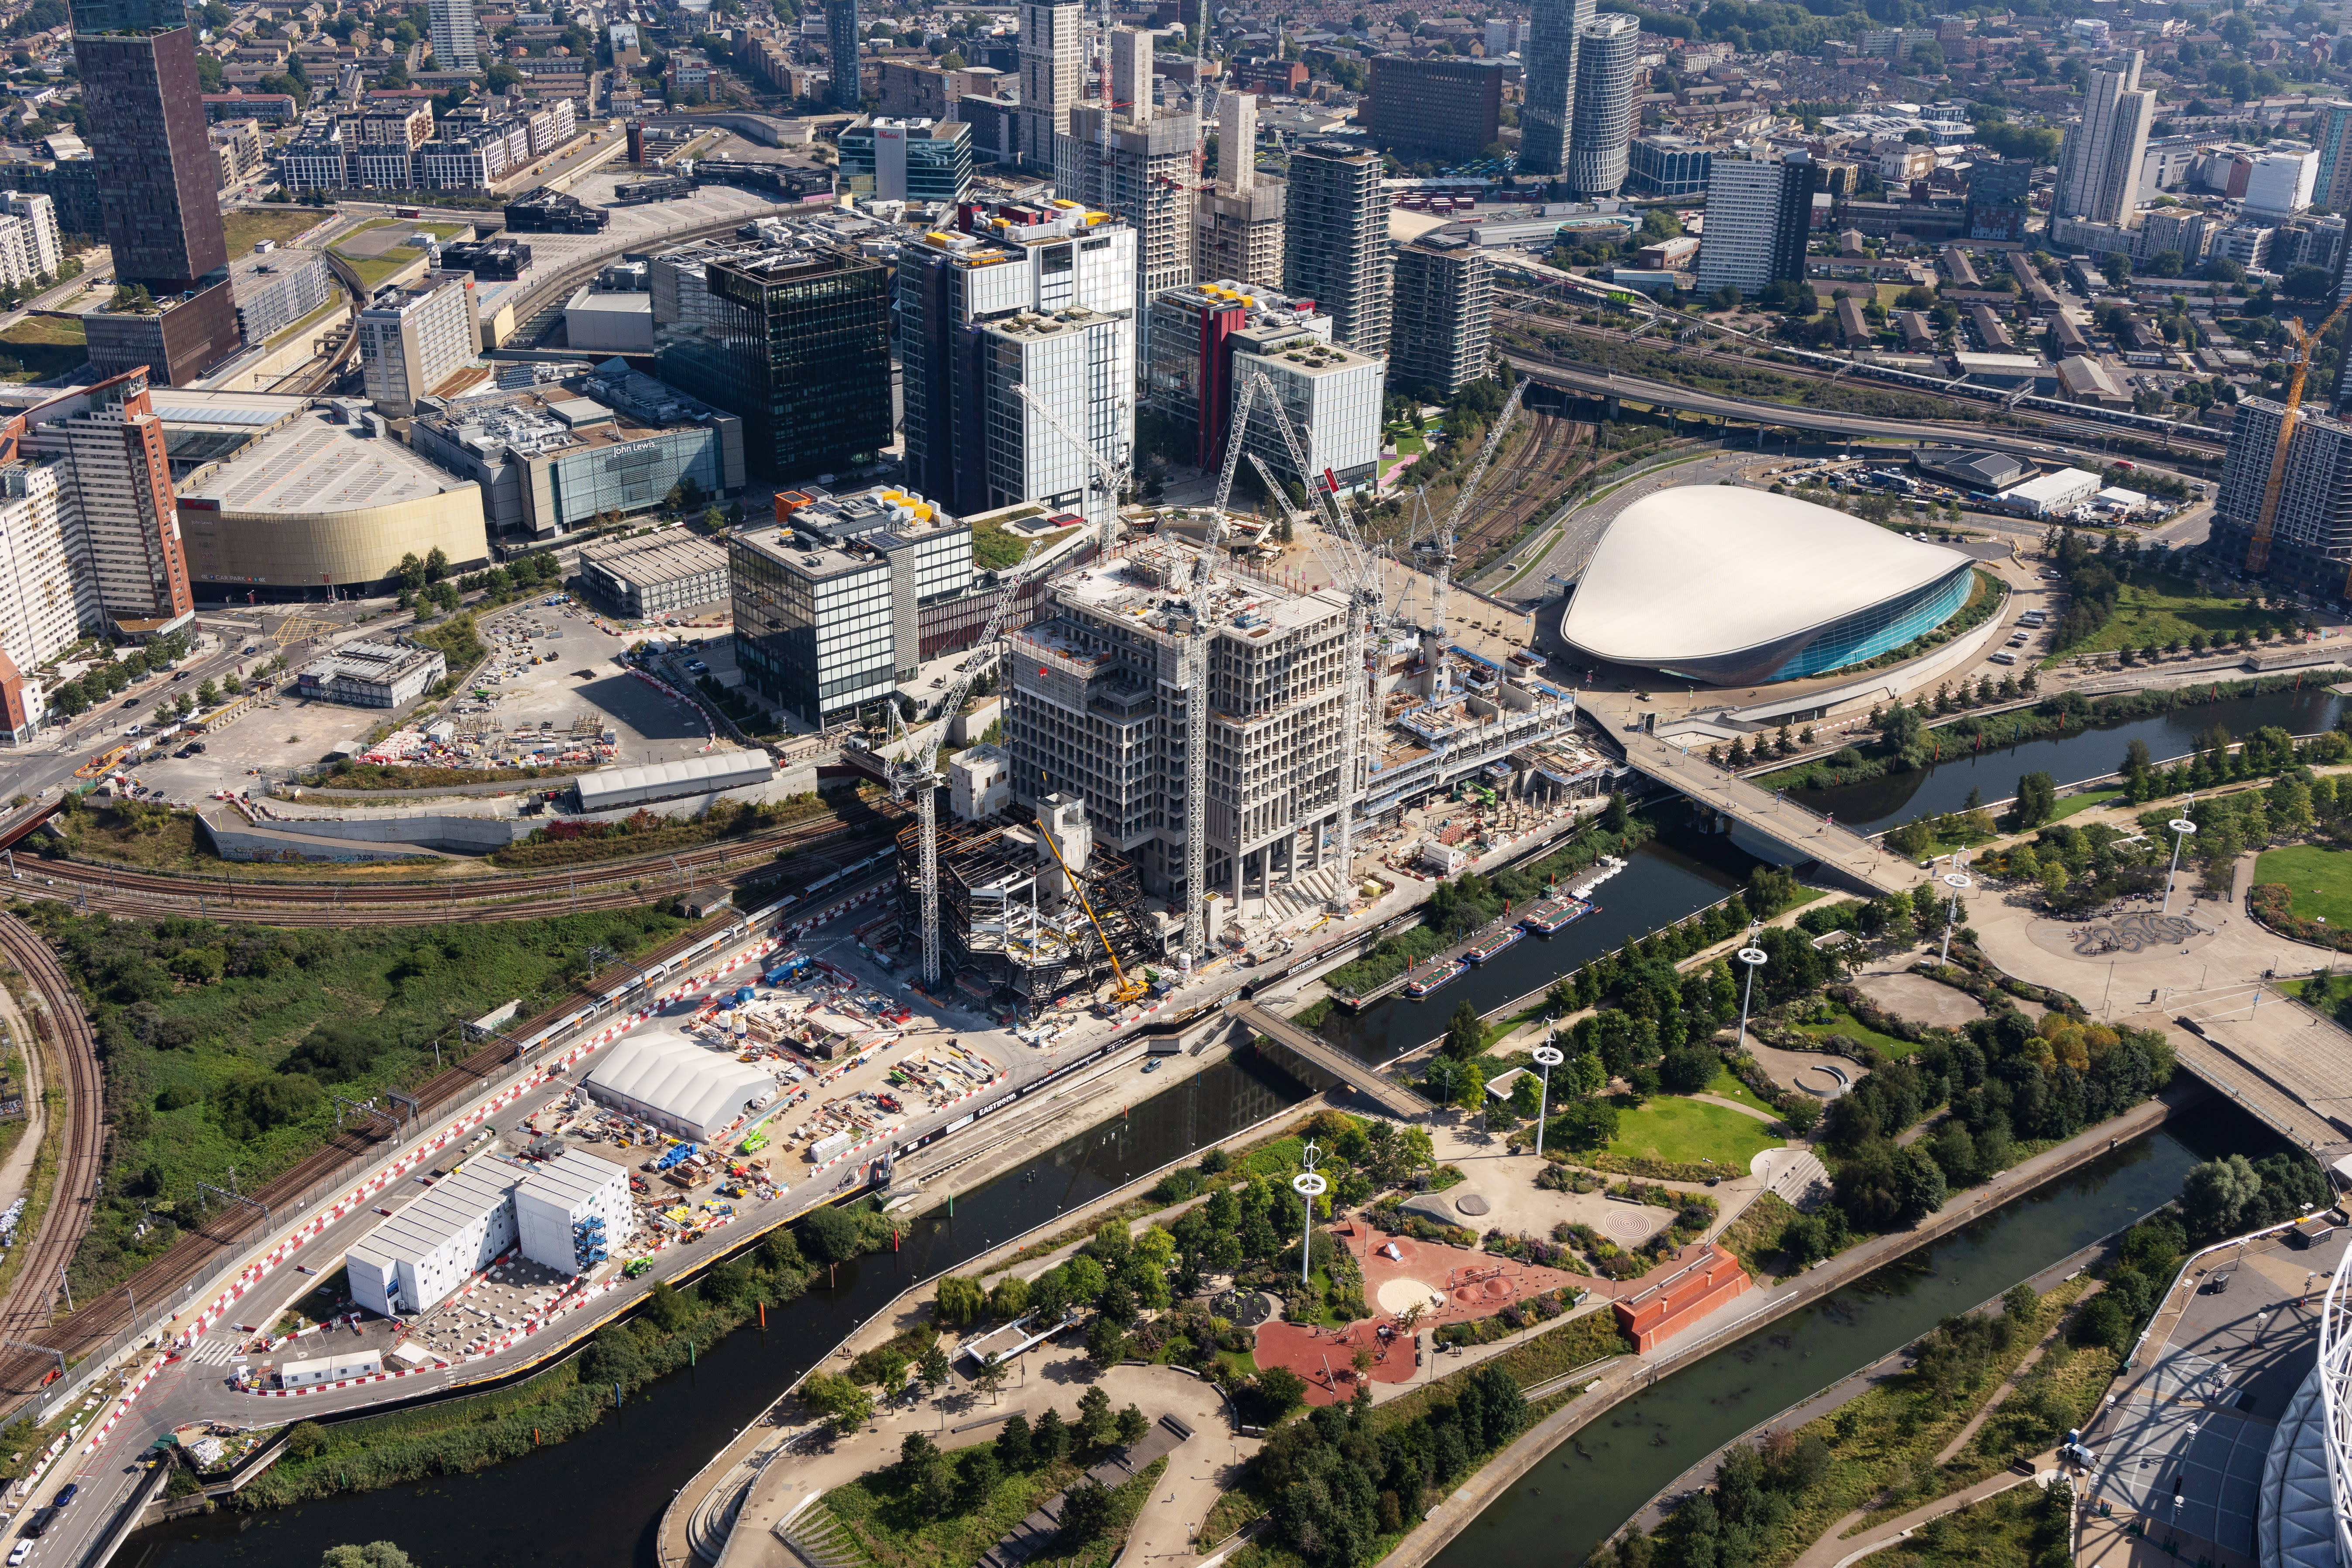 Close-up-aerial-view-of-East-Bank,-Queen-Elizabeth-Olympic-Park,-October-2021.-Photography-by-London-Legacy-Development-Corporation.jpg